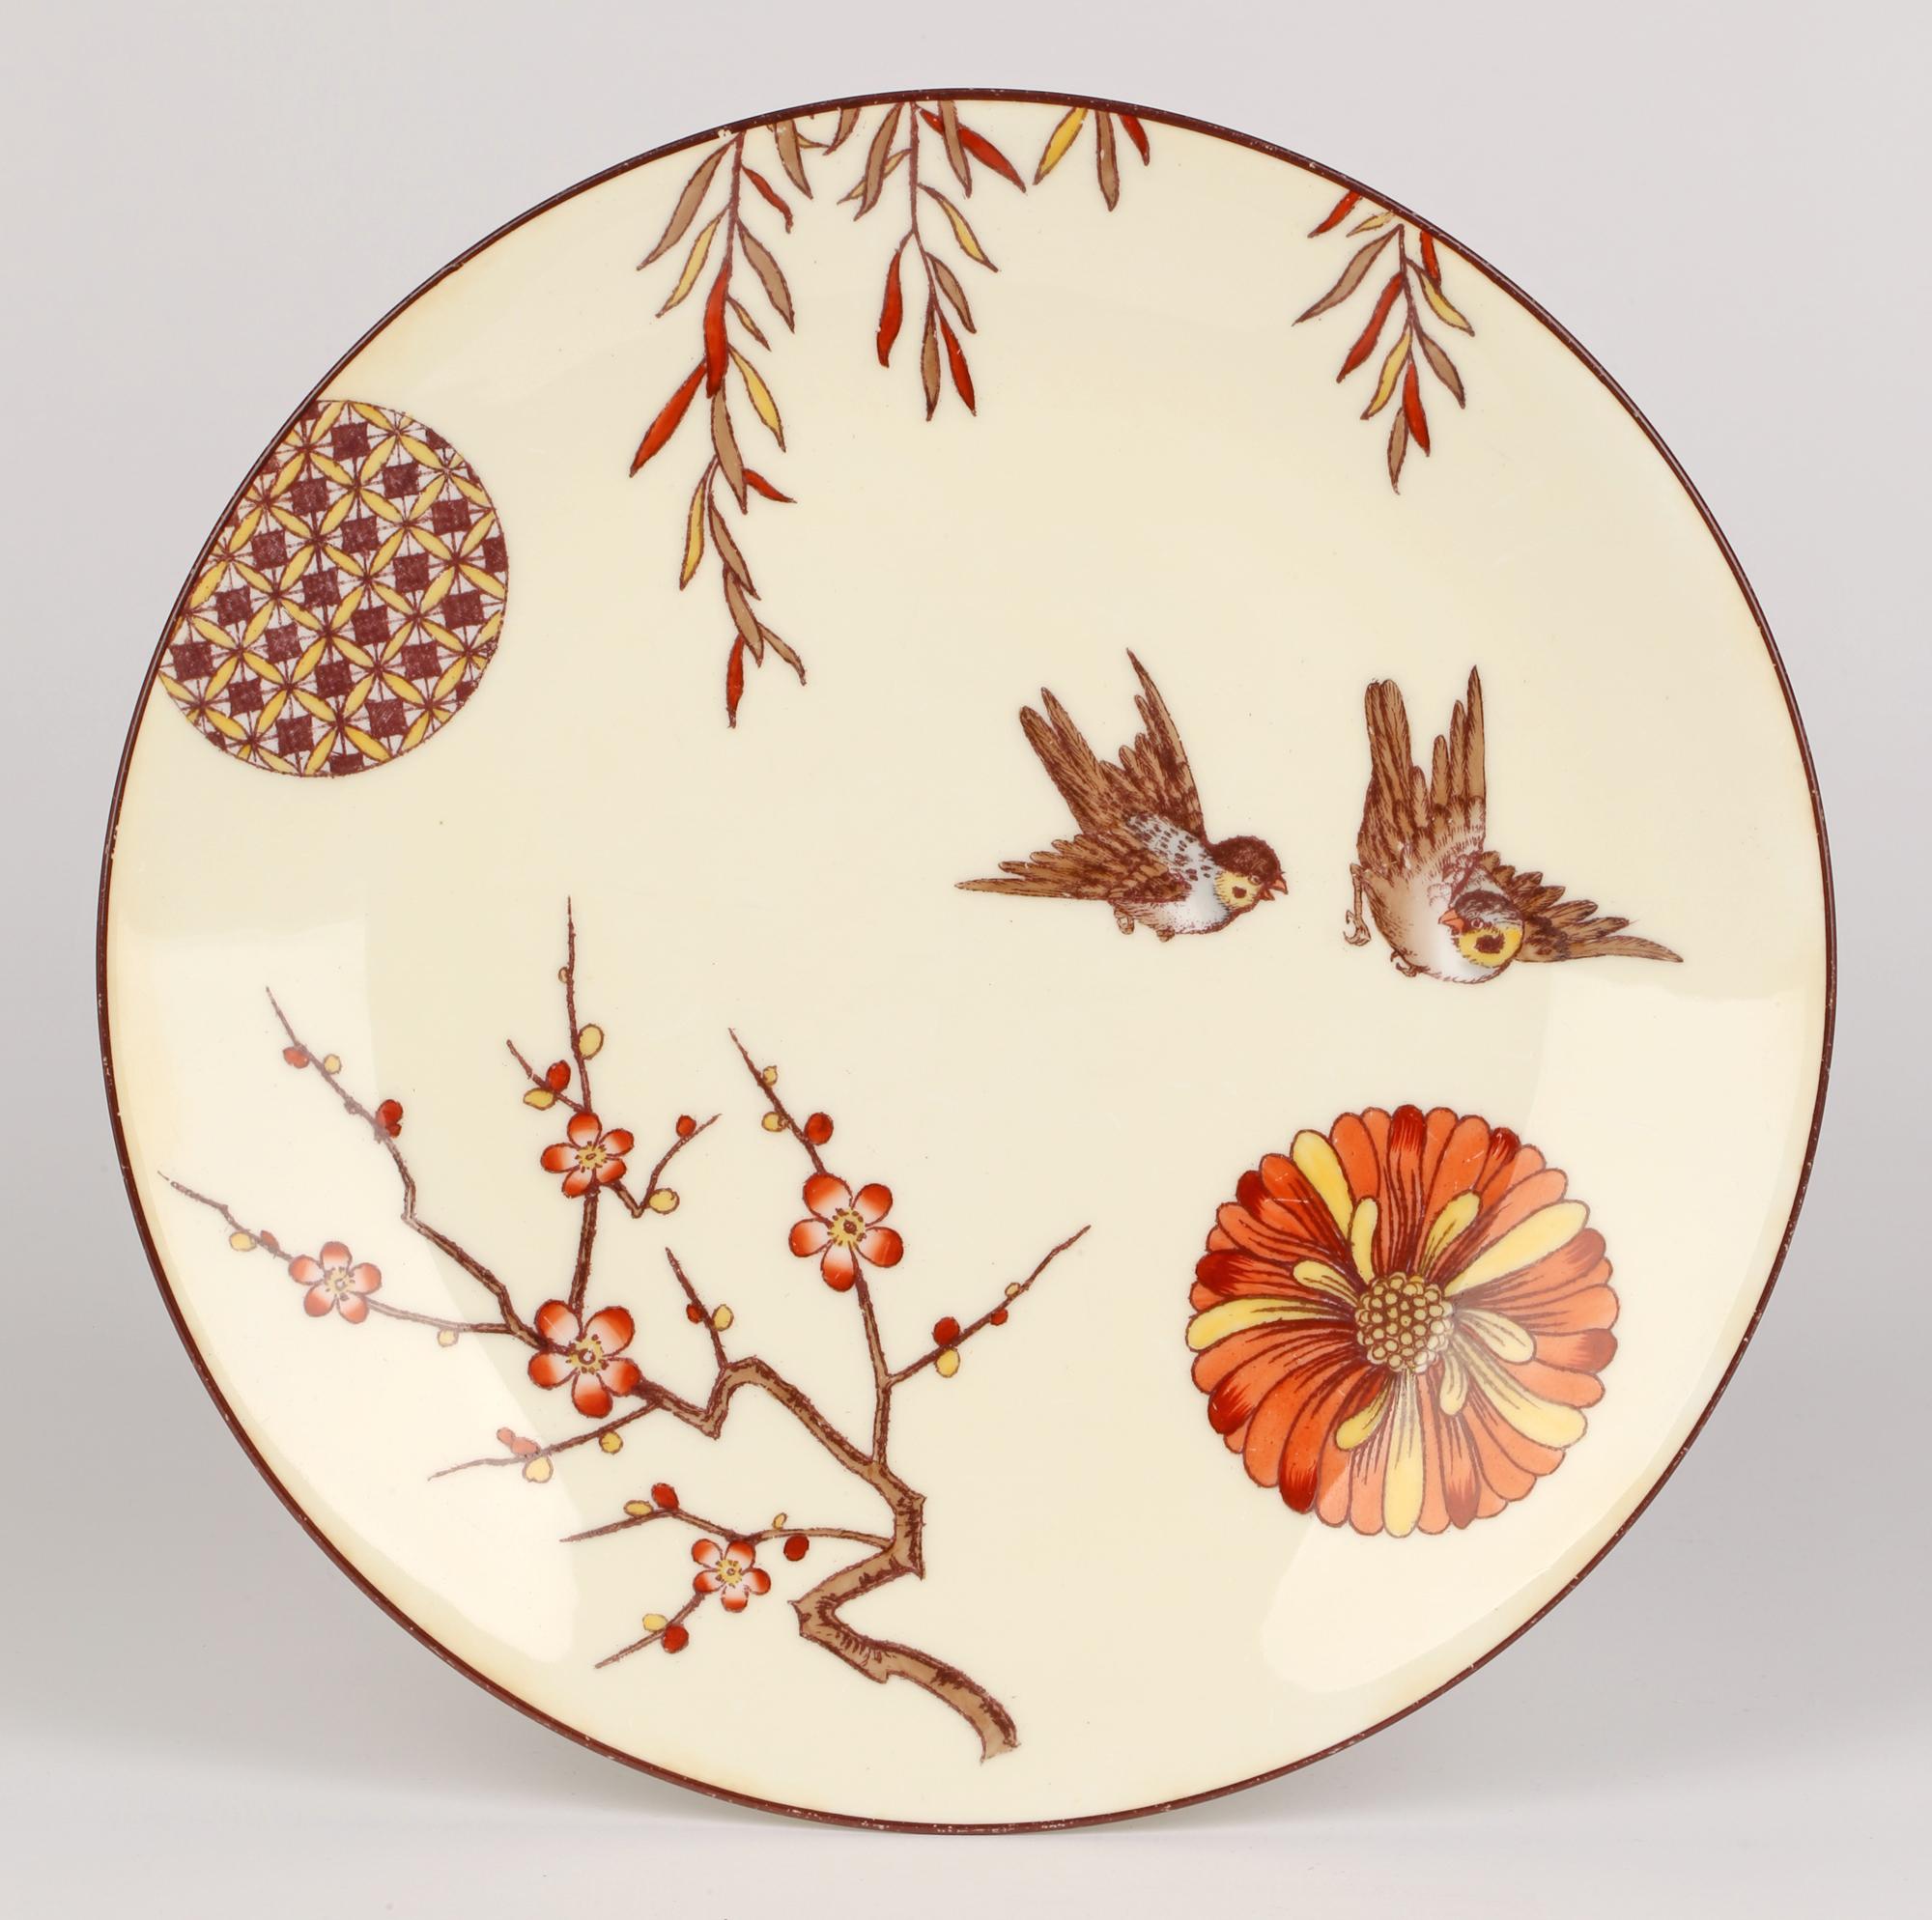 English Minton Porcelain Cabinet Plate Attributed to Christopher Dresser, 1880 For Sale